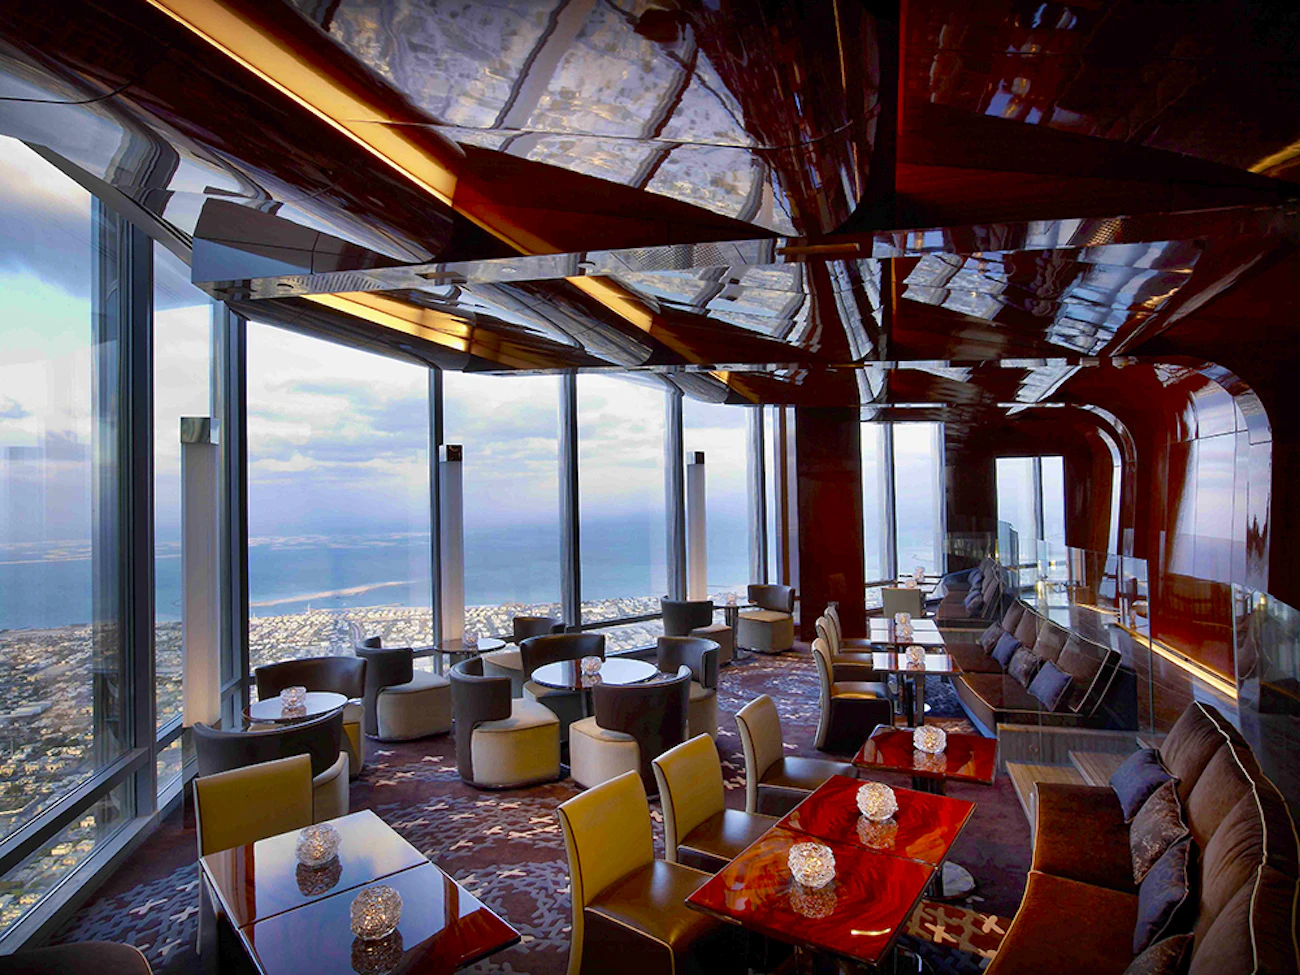 Dine experience at Burj Khalifa - Atmosphere with Discover Dubai by Night Category